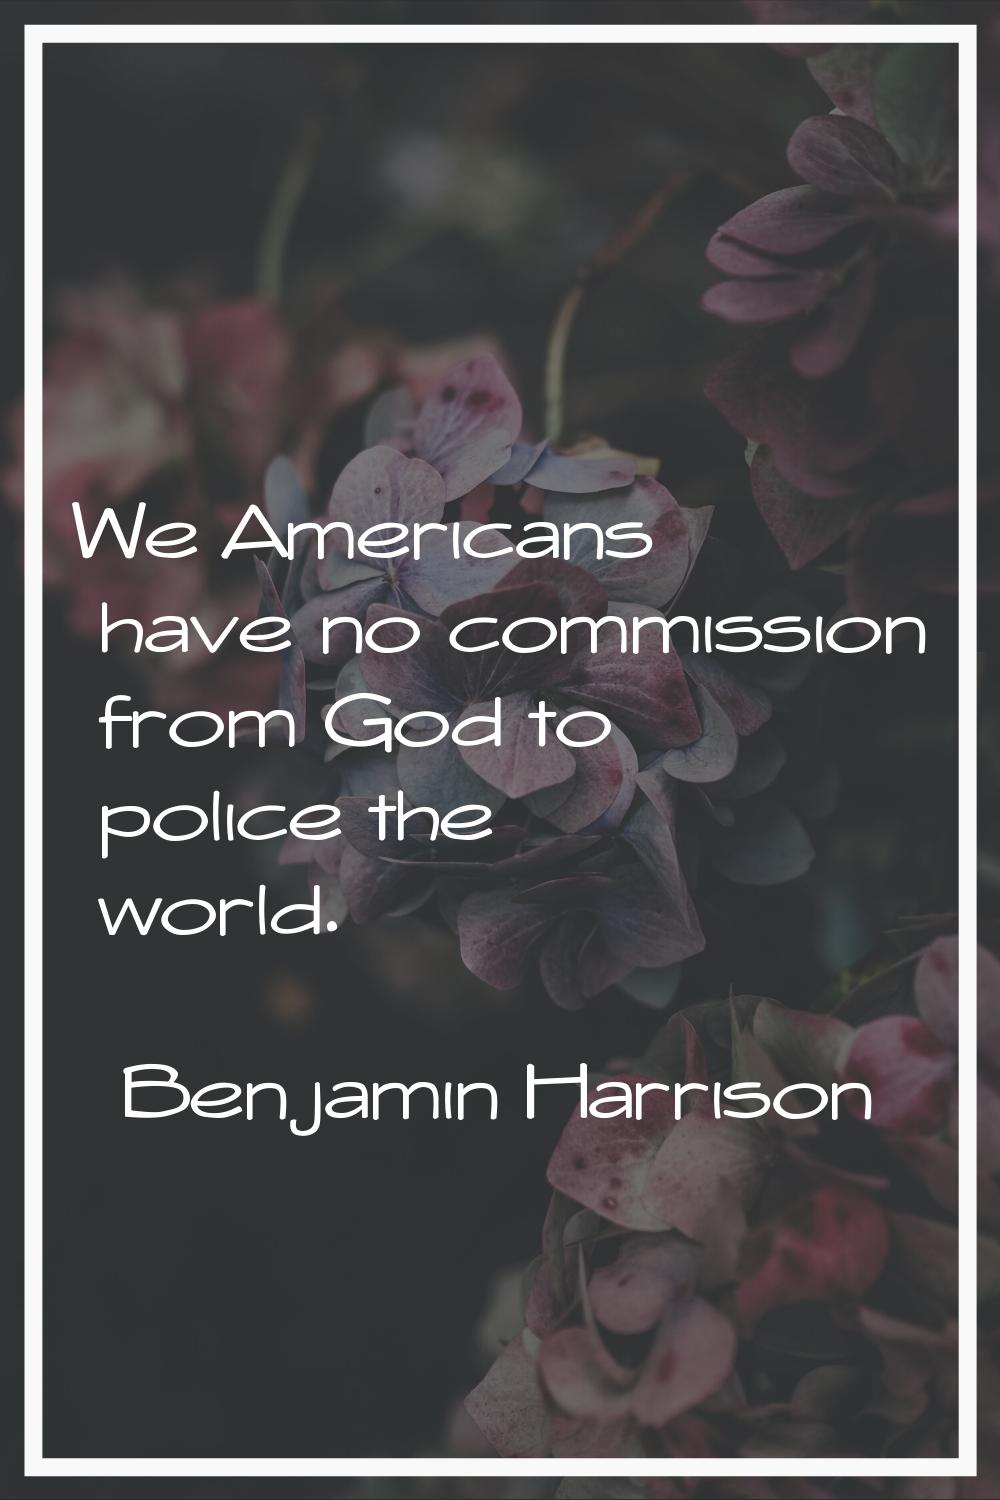 We Americans have no commission from God to police the world.